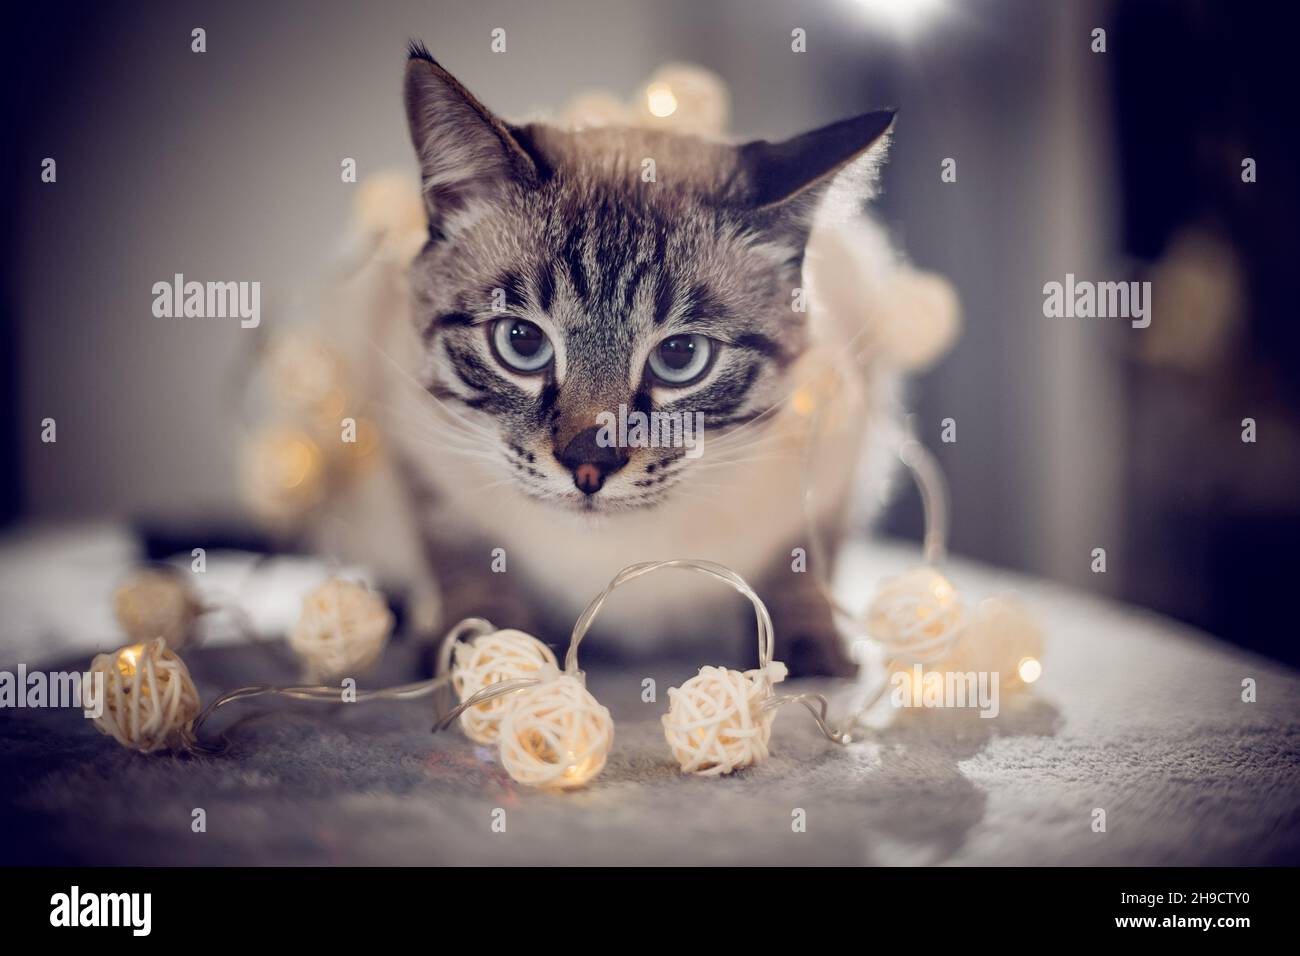 A Thai cat plays with a Christmas garland with balls. Portrait of a Thai cat with a Christmas garland. Cat with a striped muzzle. A pet and garland . Stock Photo